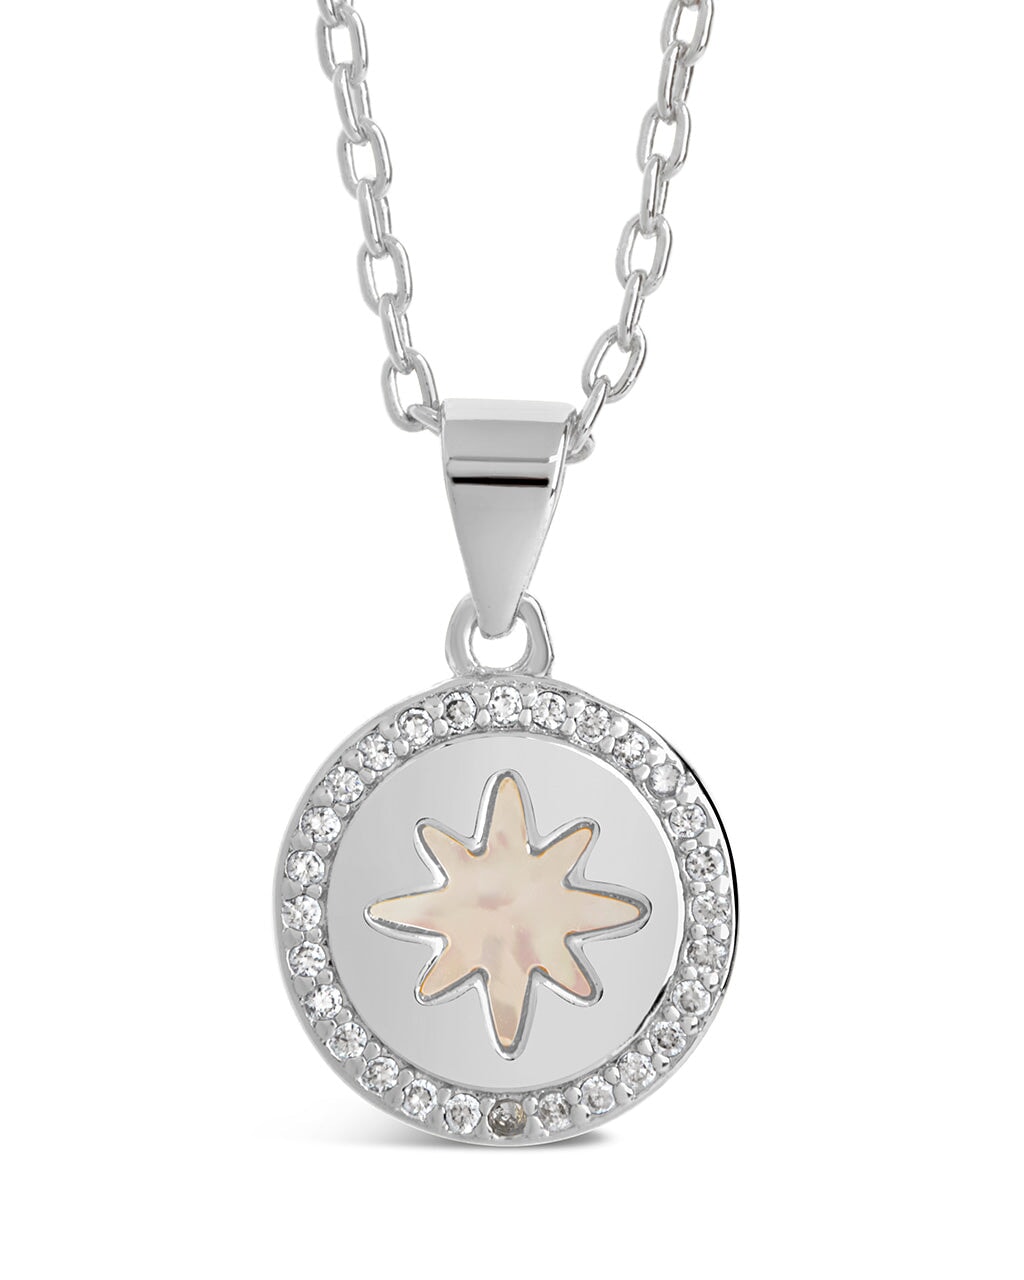 Brae Pendant Necklace Sterling Forever Silver 